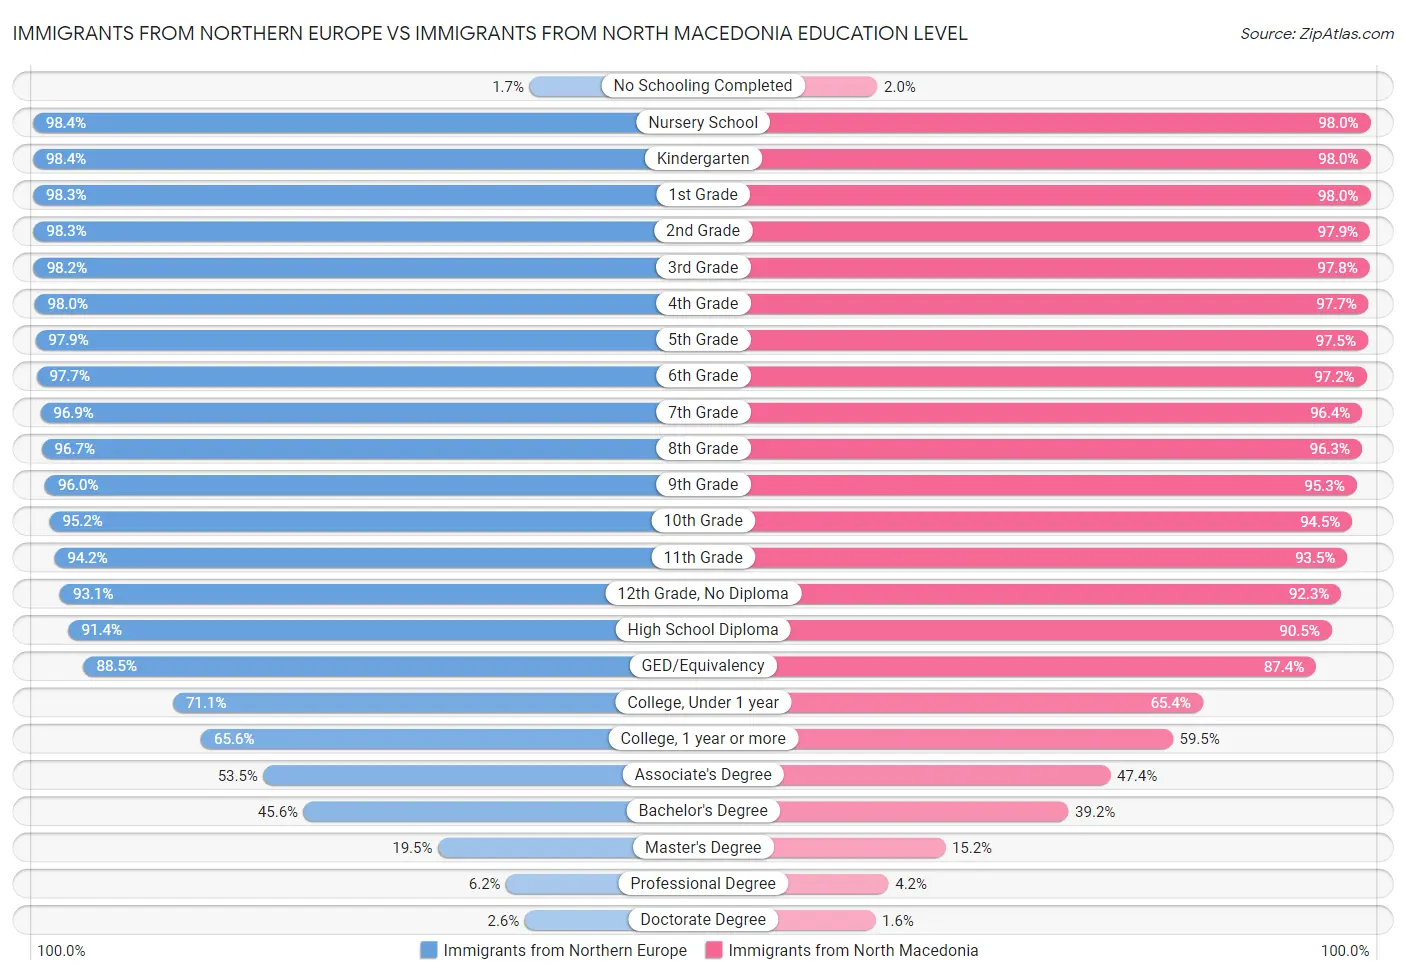 Immigrants from Northern Europe vs Immigrants from North Macedonia Education Level